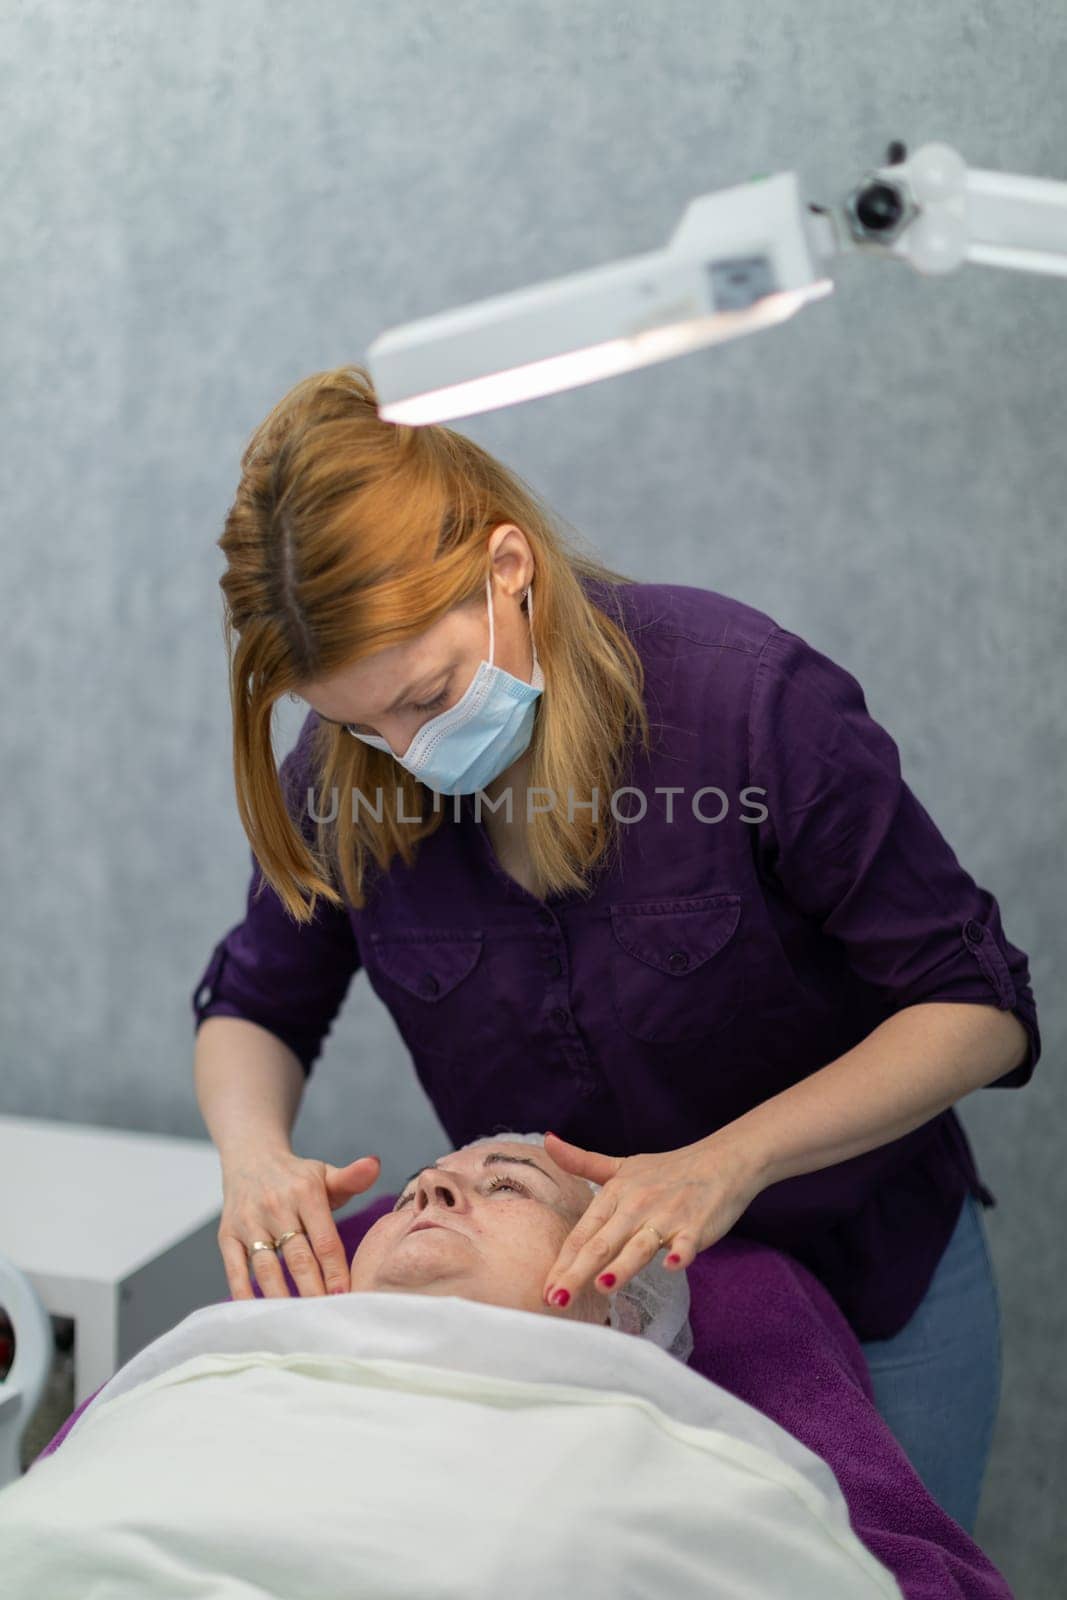 An experienced beautician performs a gentle facial massage for her client. by fotodrobik